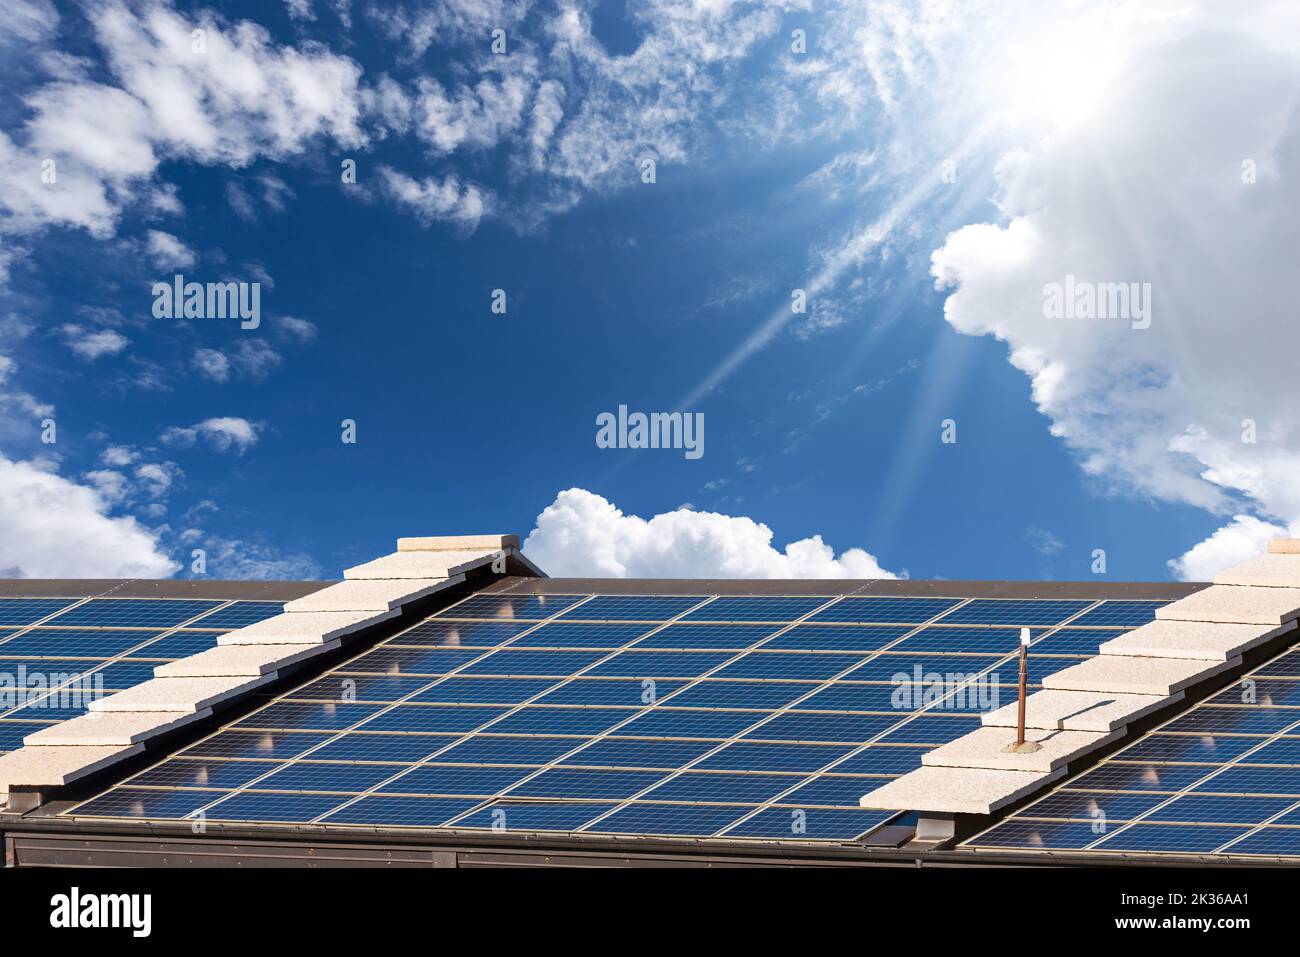 Close-up of a roof with many solar panels against a clear blue sky with clouds, sunbeams and copy space. Veneto, Italy, Europe. Stock Photo